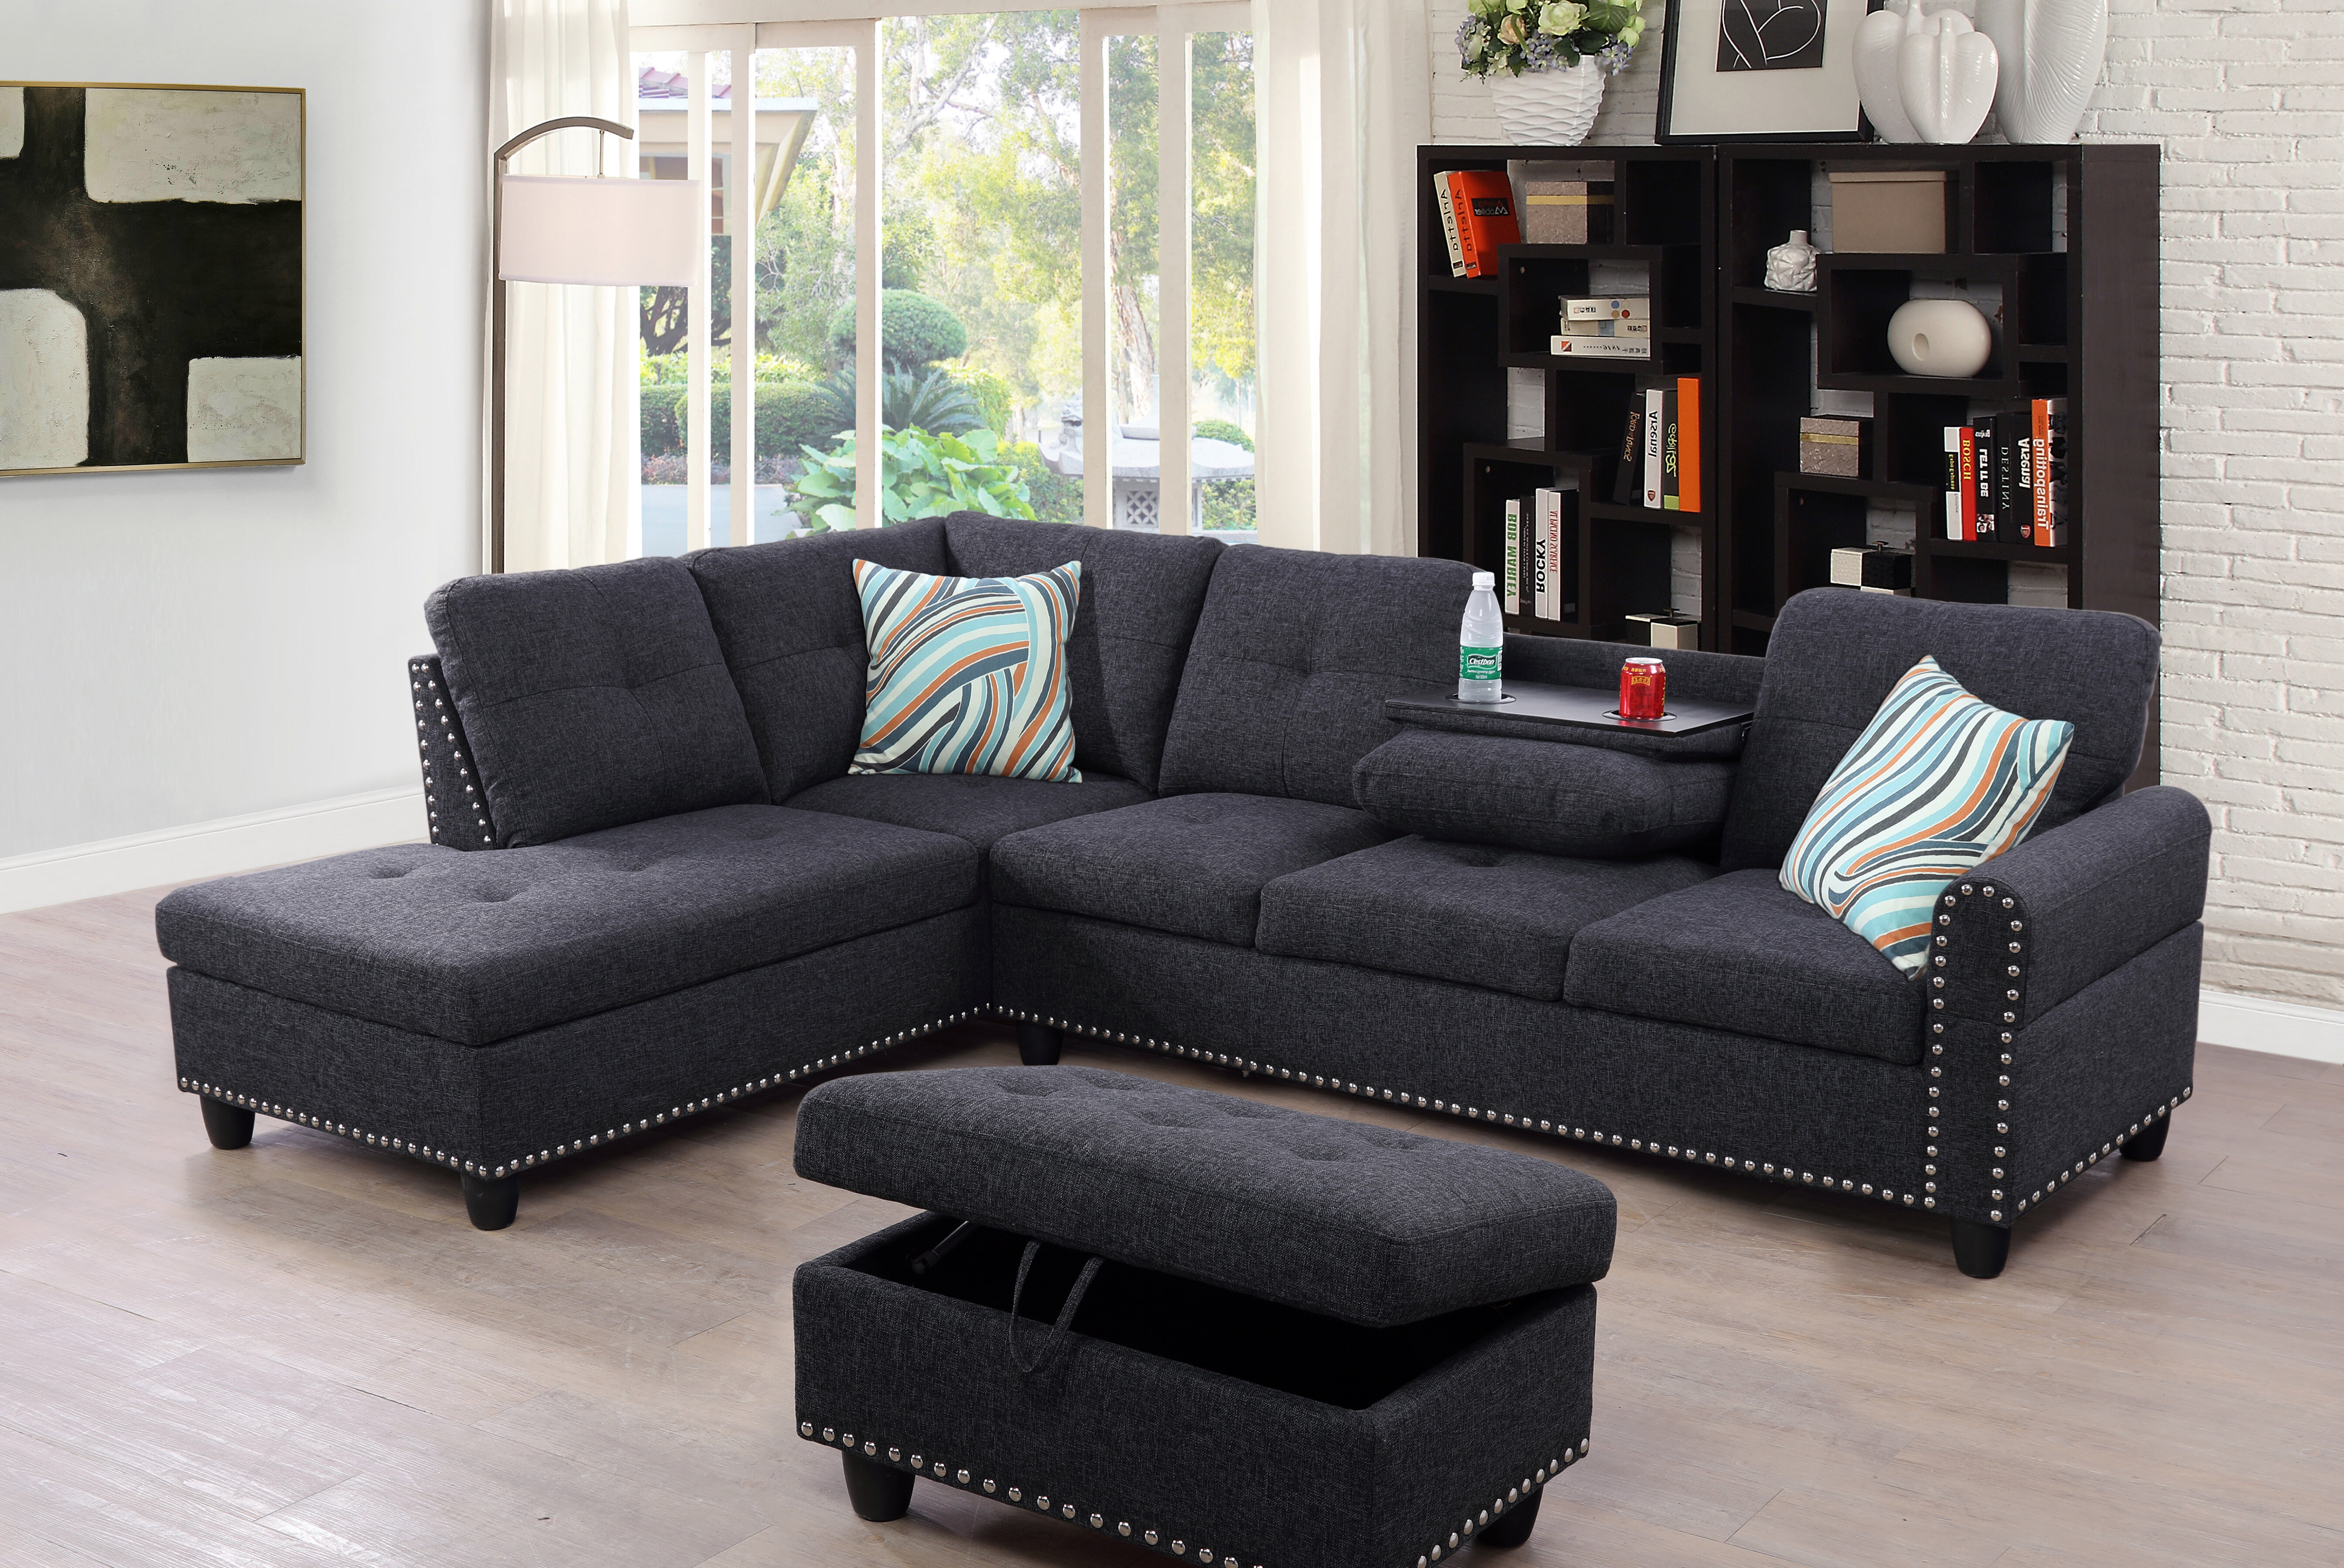 Right Hand  Sectional Sofa Set Build-in Drop Down Coffee Table,Ottoman,2 Pillows 